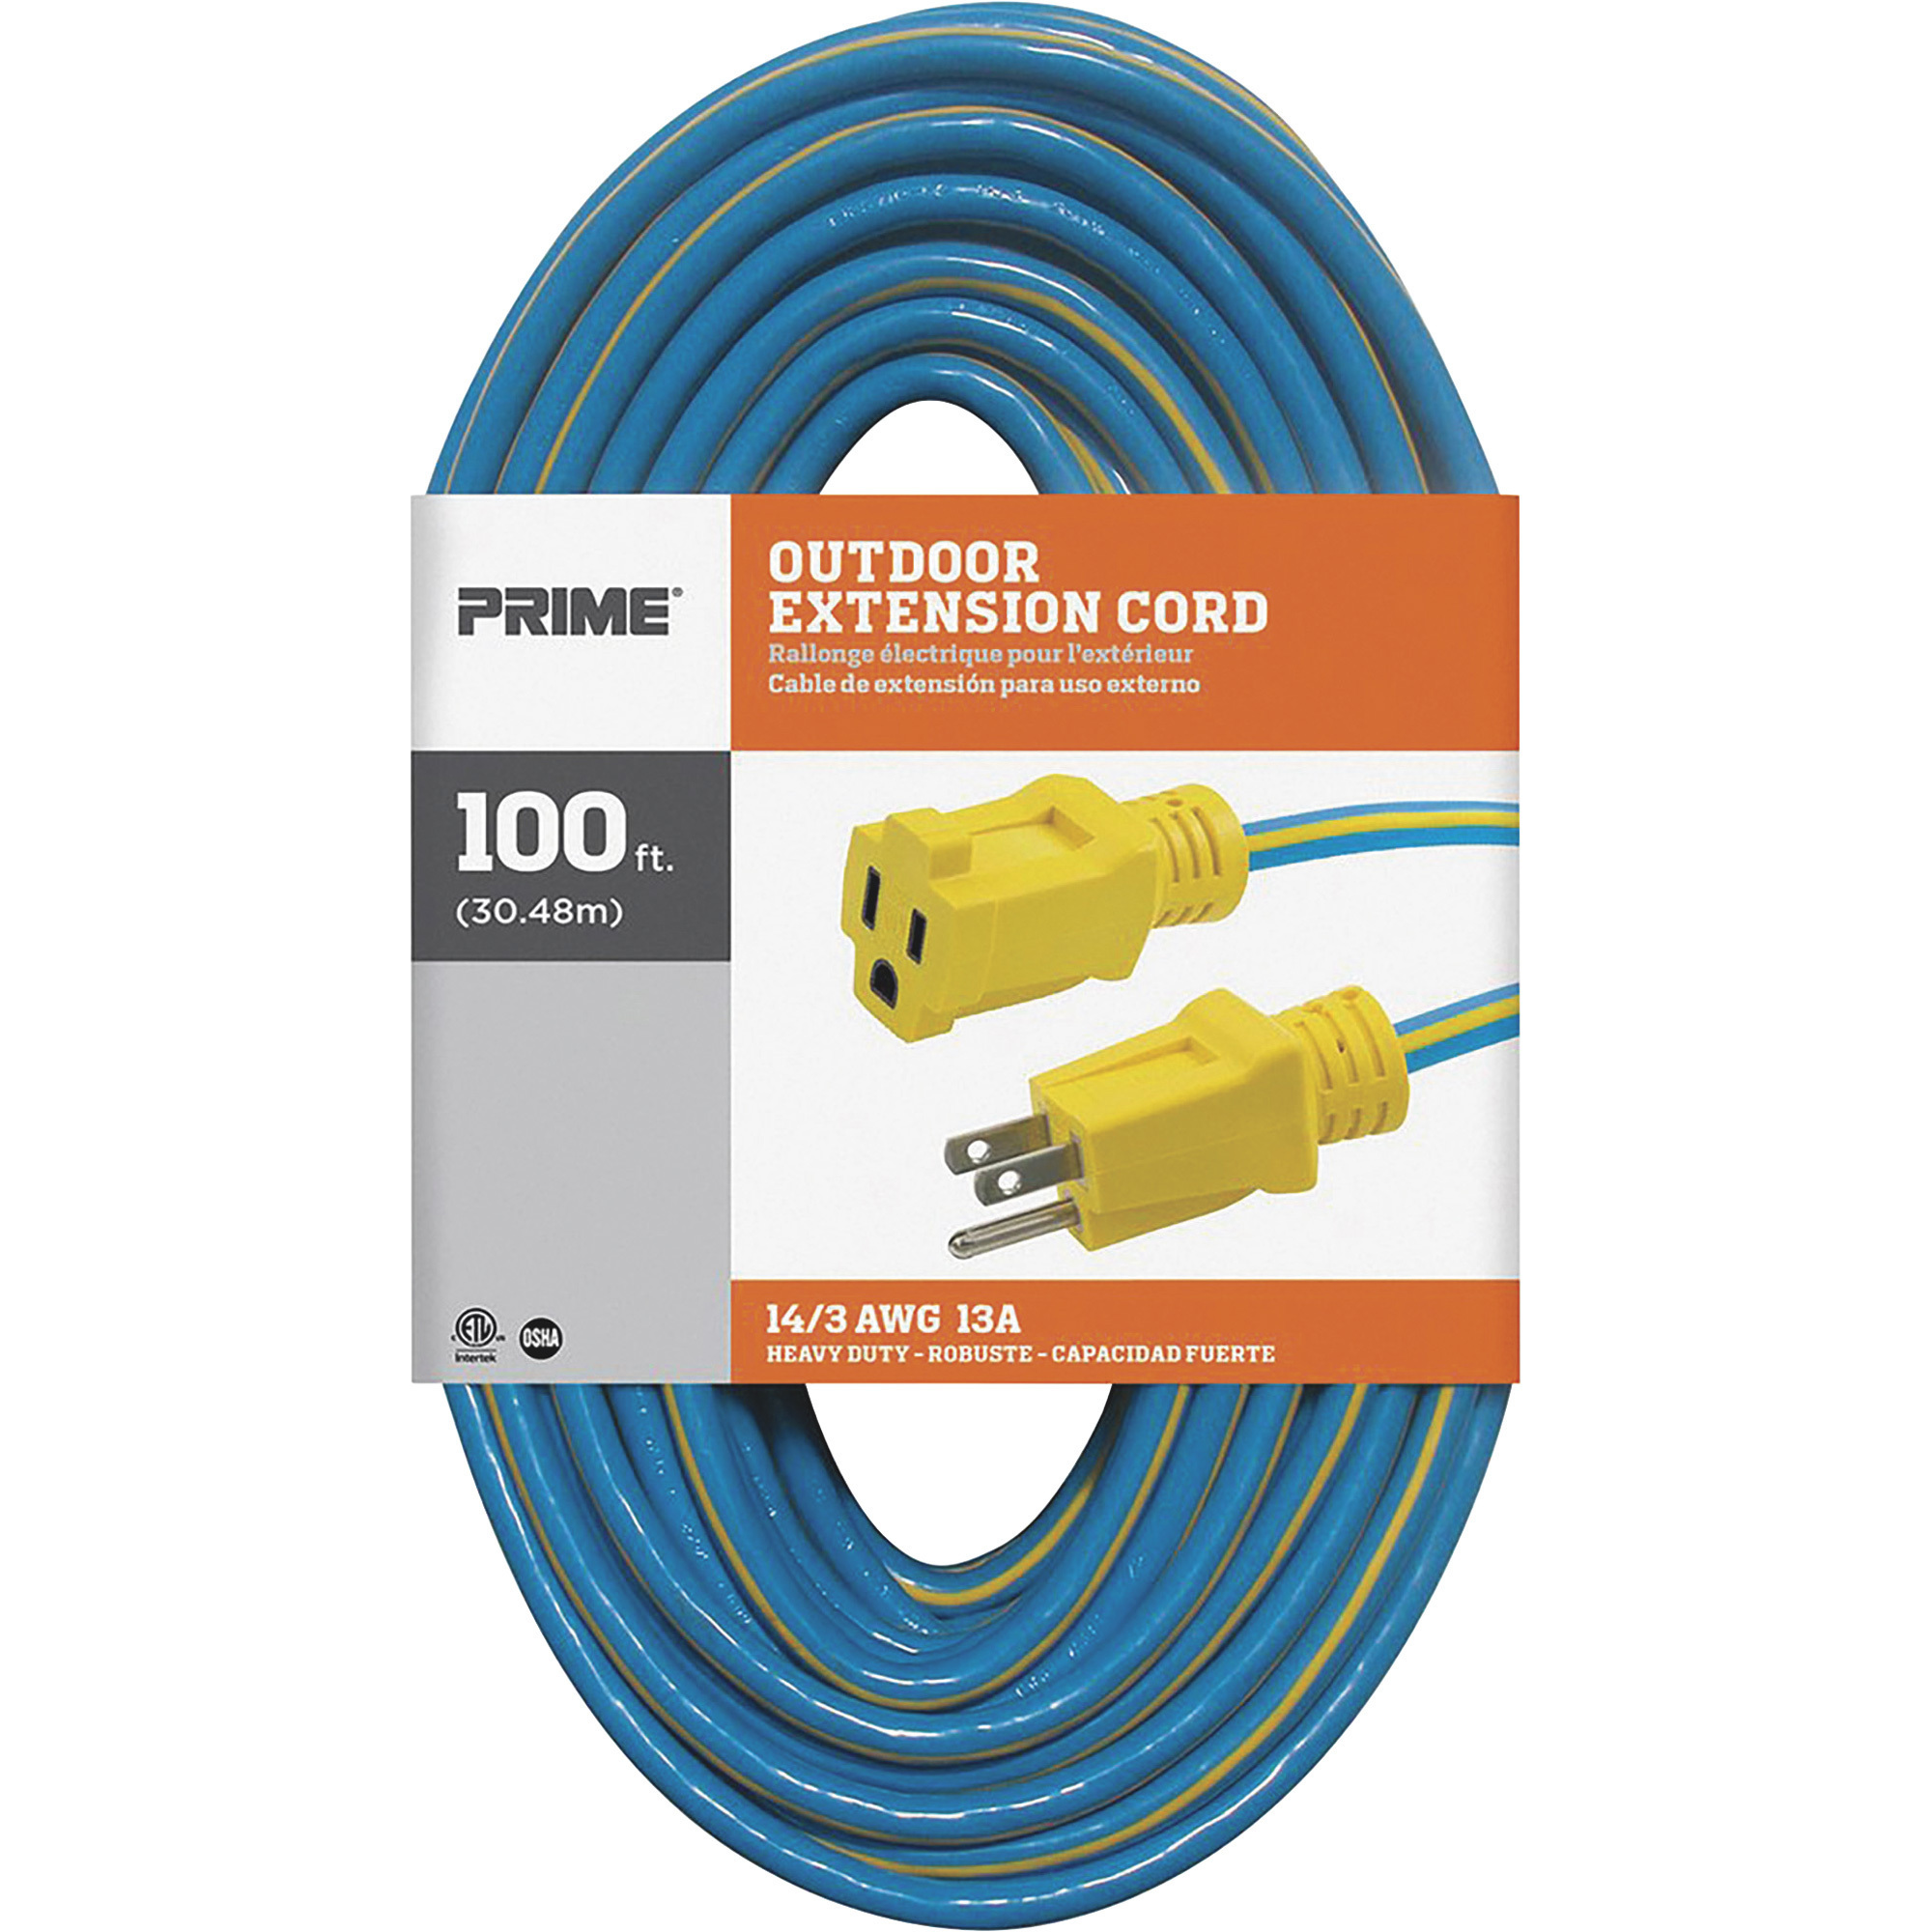 Prime Wire & Cable Heavy-Duty Outdoor Extension Cord, 100ft. 14/3